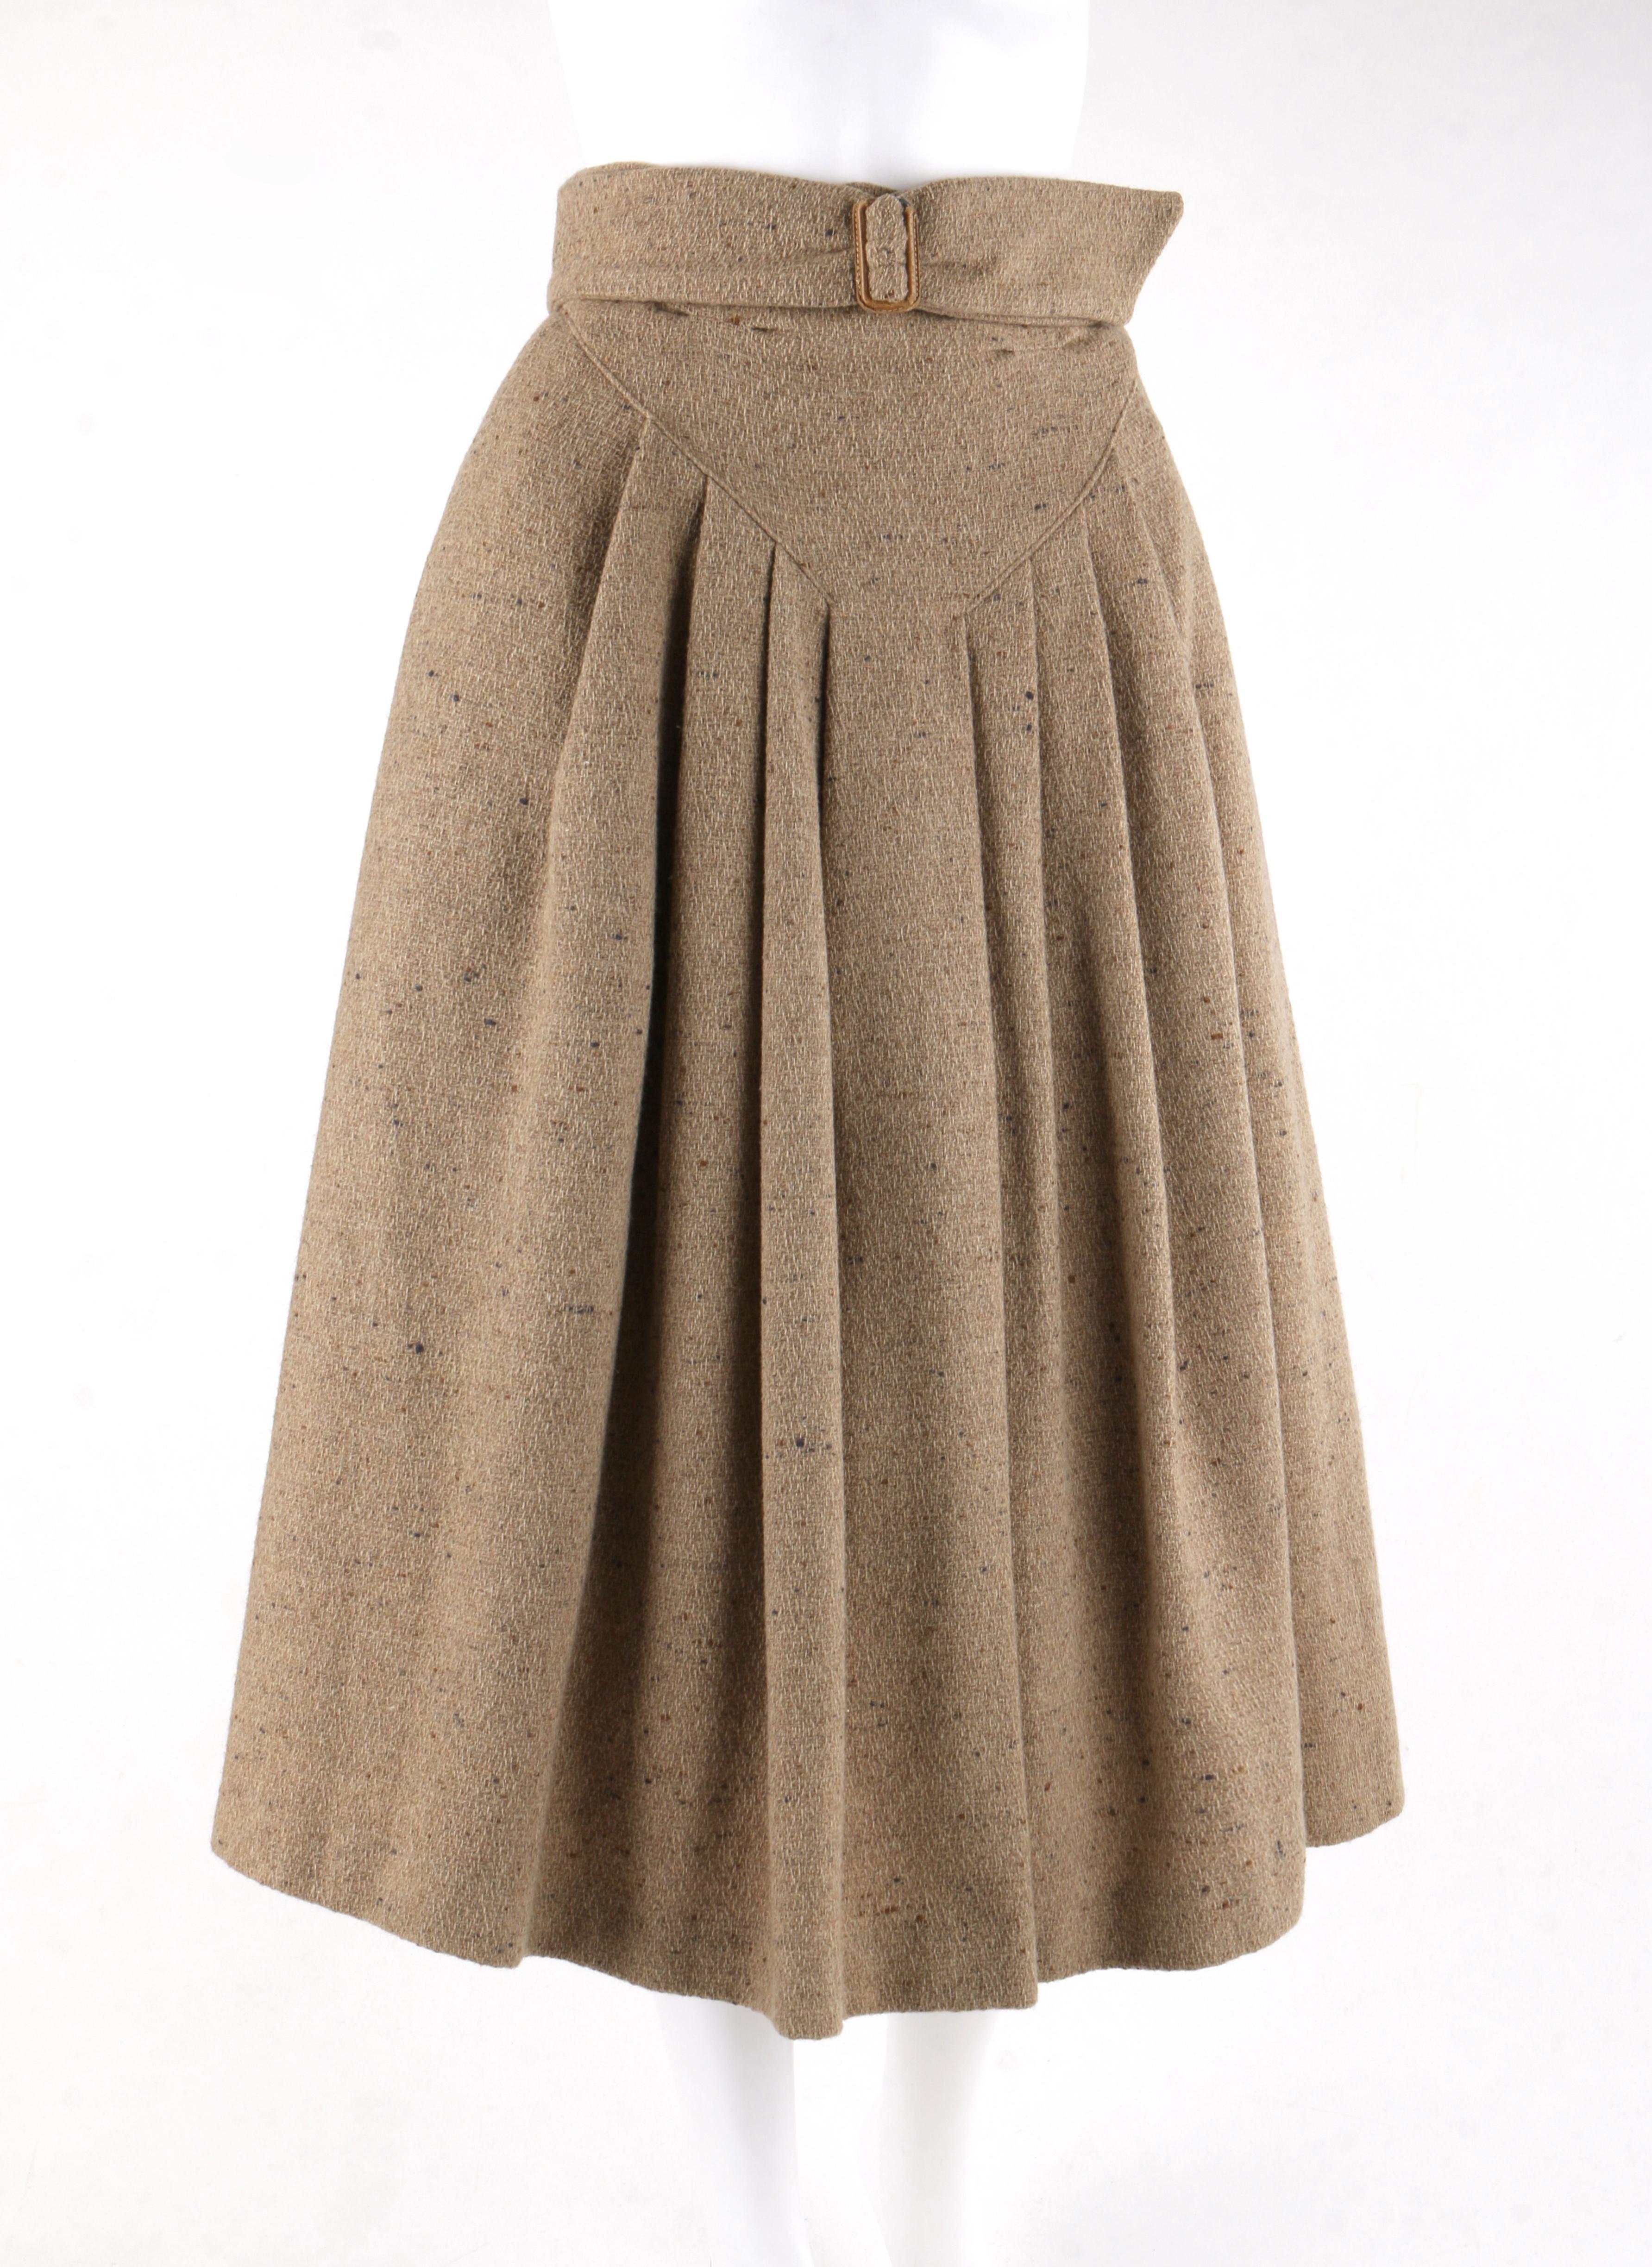 GIORGIO ARMANI c.1980’s Brown Tweed Wool Pleated Wrap Buckle A-Line Skirt
 
Circa: 1980’s
Designer: Giorgio Armani 
Style: Wrap / A-Line Skirt
Color(s): Shades of brown and gray  
Lined: Yes
Marked Fabric Content: 100% Wool 
Additional Details /